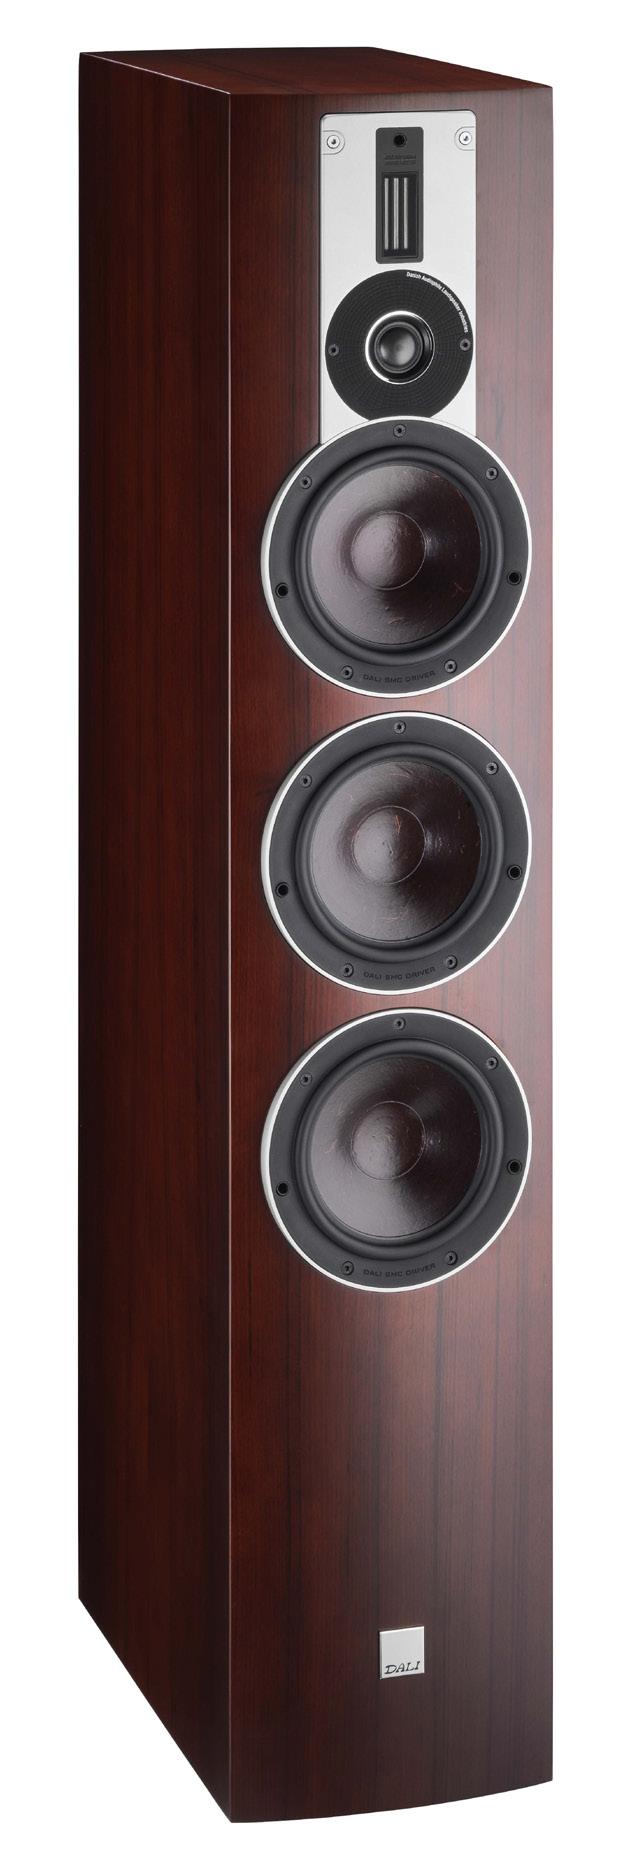 This extra woofer makes it more powerful, with an enhanced and controlled performance.